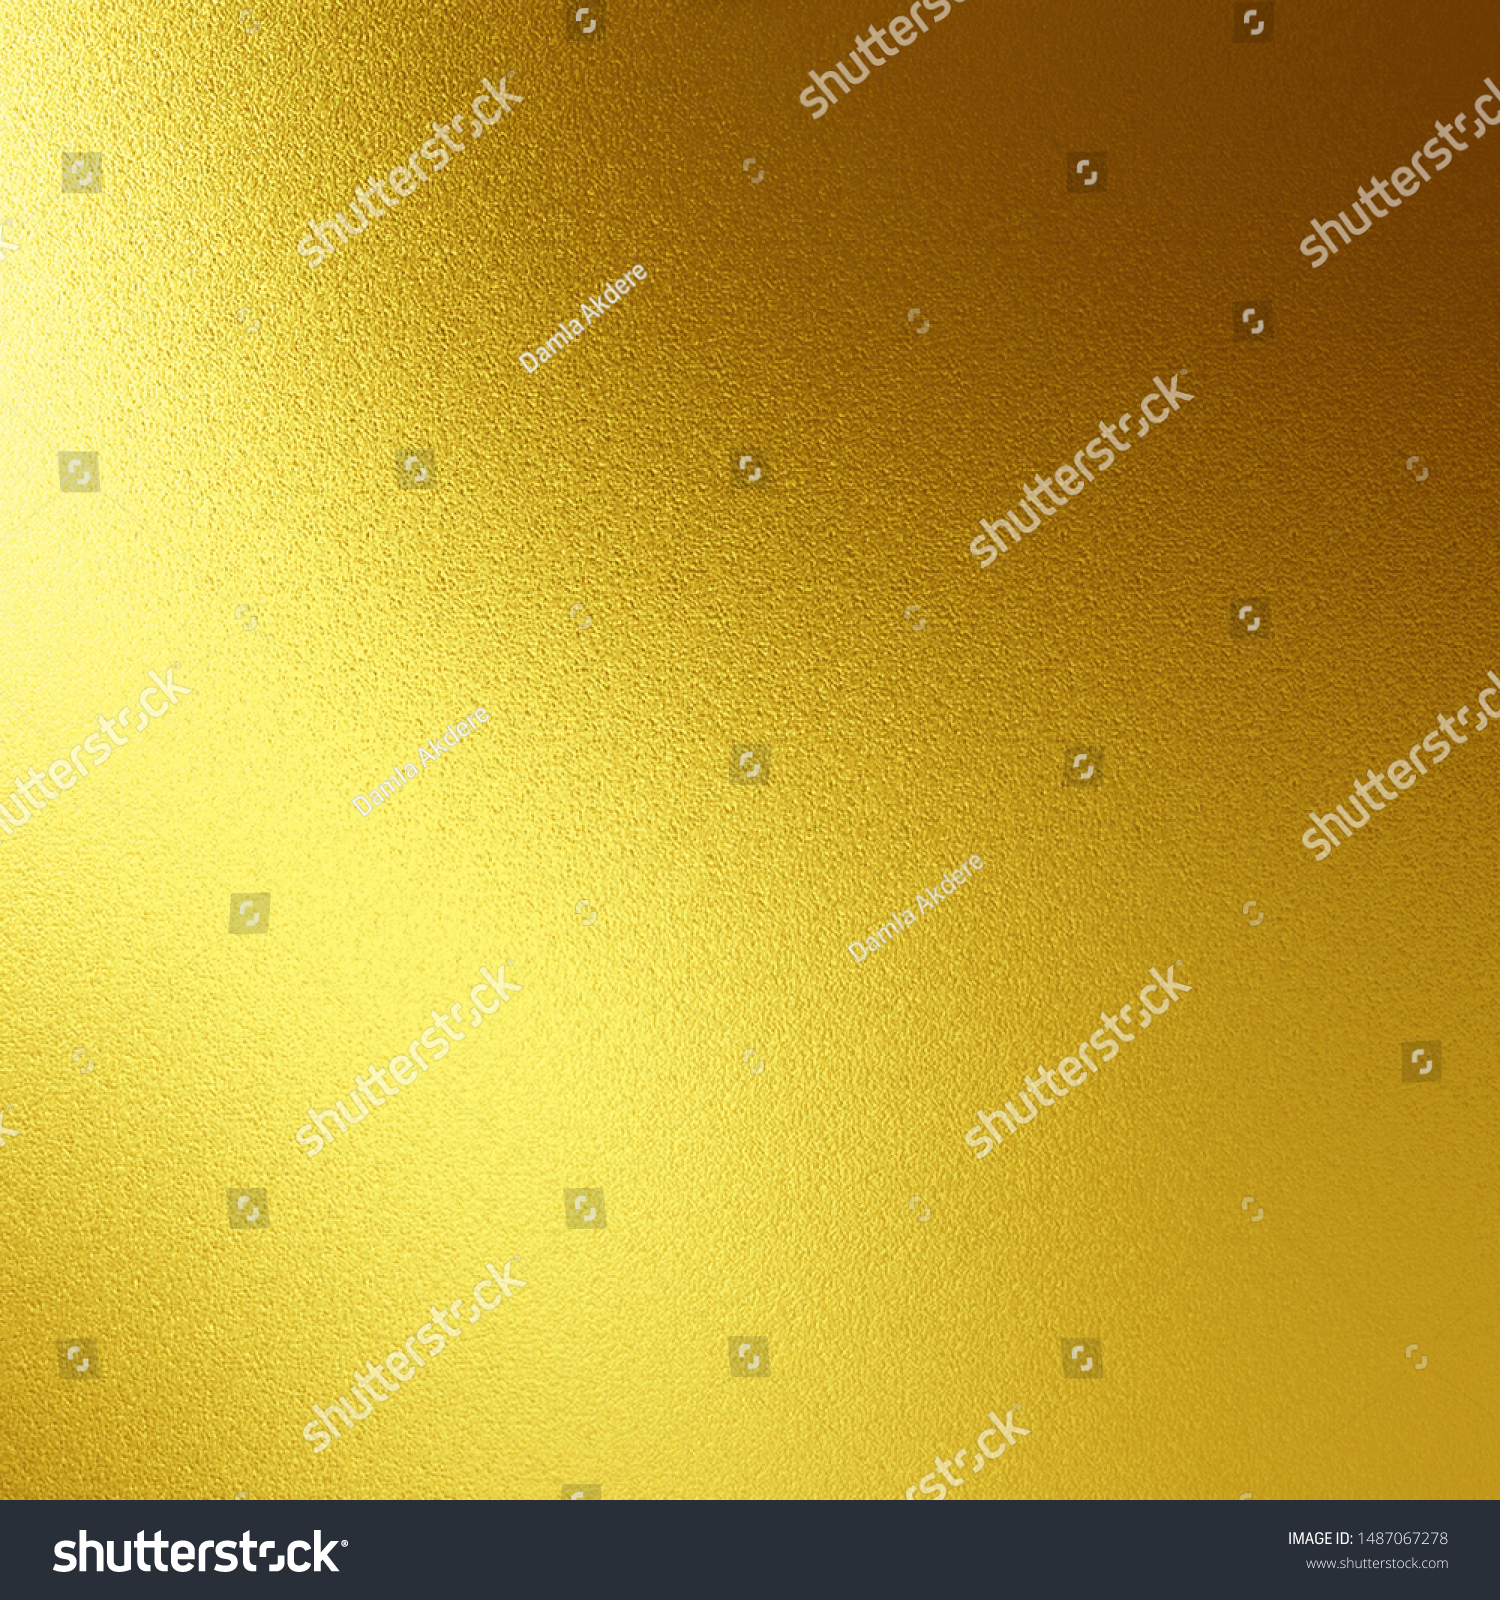 Gold Background, Gold Texture, Gold Gradient background, Gold foil background, Metallic wallpaper, Gradient texture. Design for poster, invitation, card, wedding invitation. #1487067278